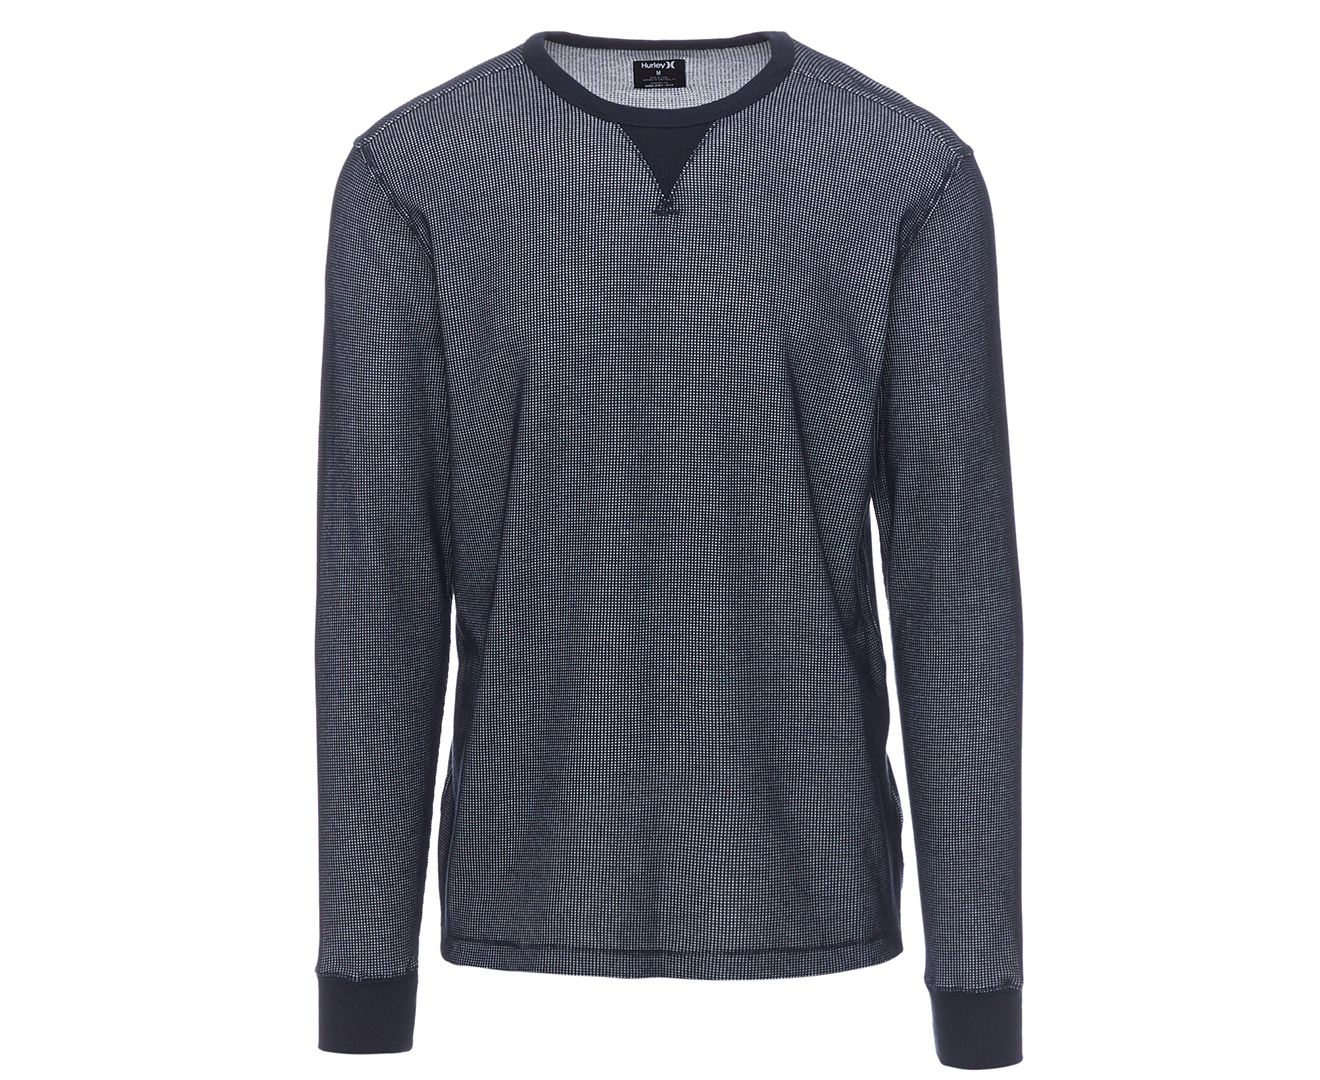 Hurley Men's Dri-FIT Wallie Long Sleeve Thermal Top - Obsidian | Catch ...